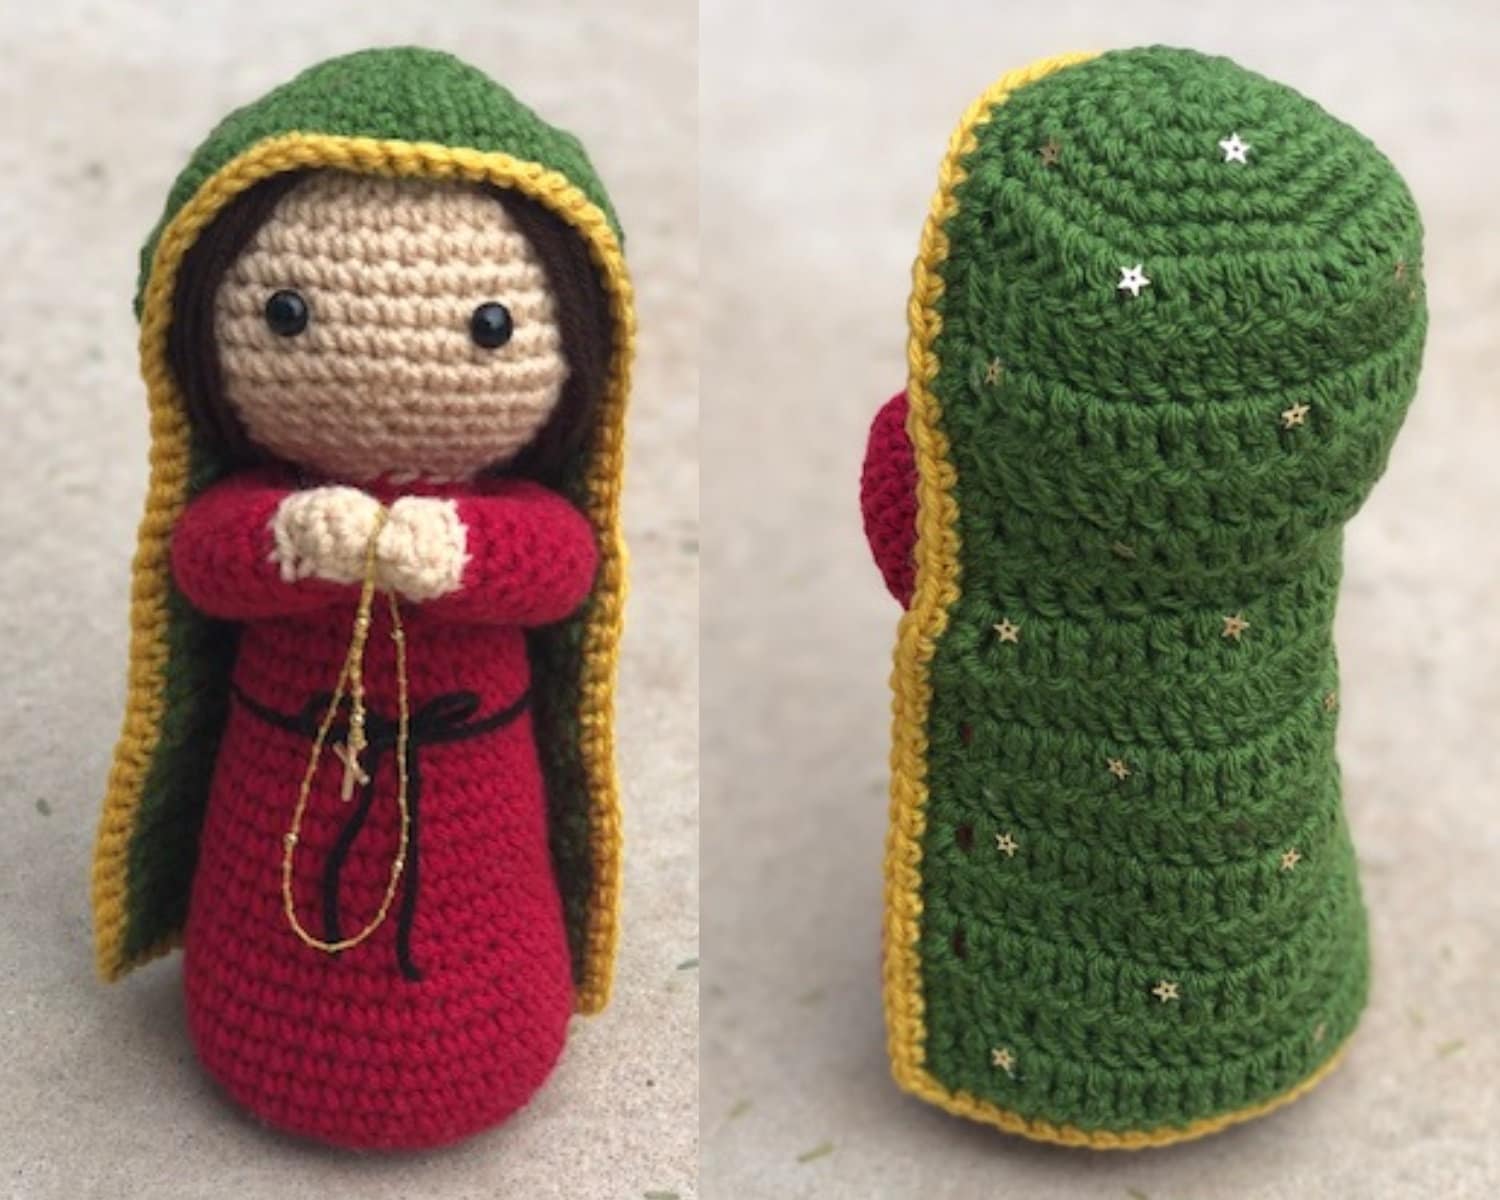 Our lady of Guadalupe- Crochet Virgencita/Guadalupe/ - agrohort.ipb.ac.id